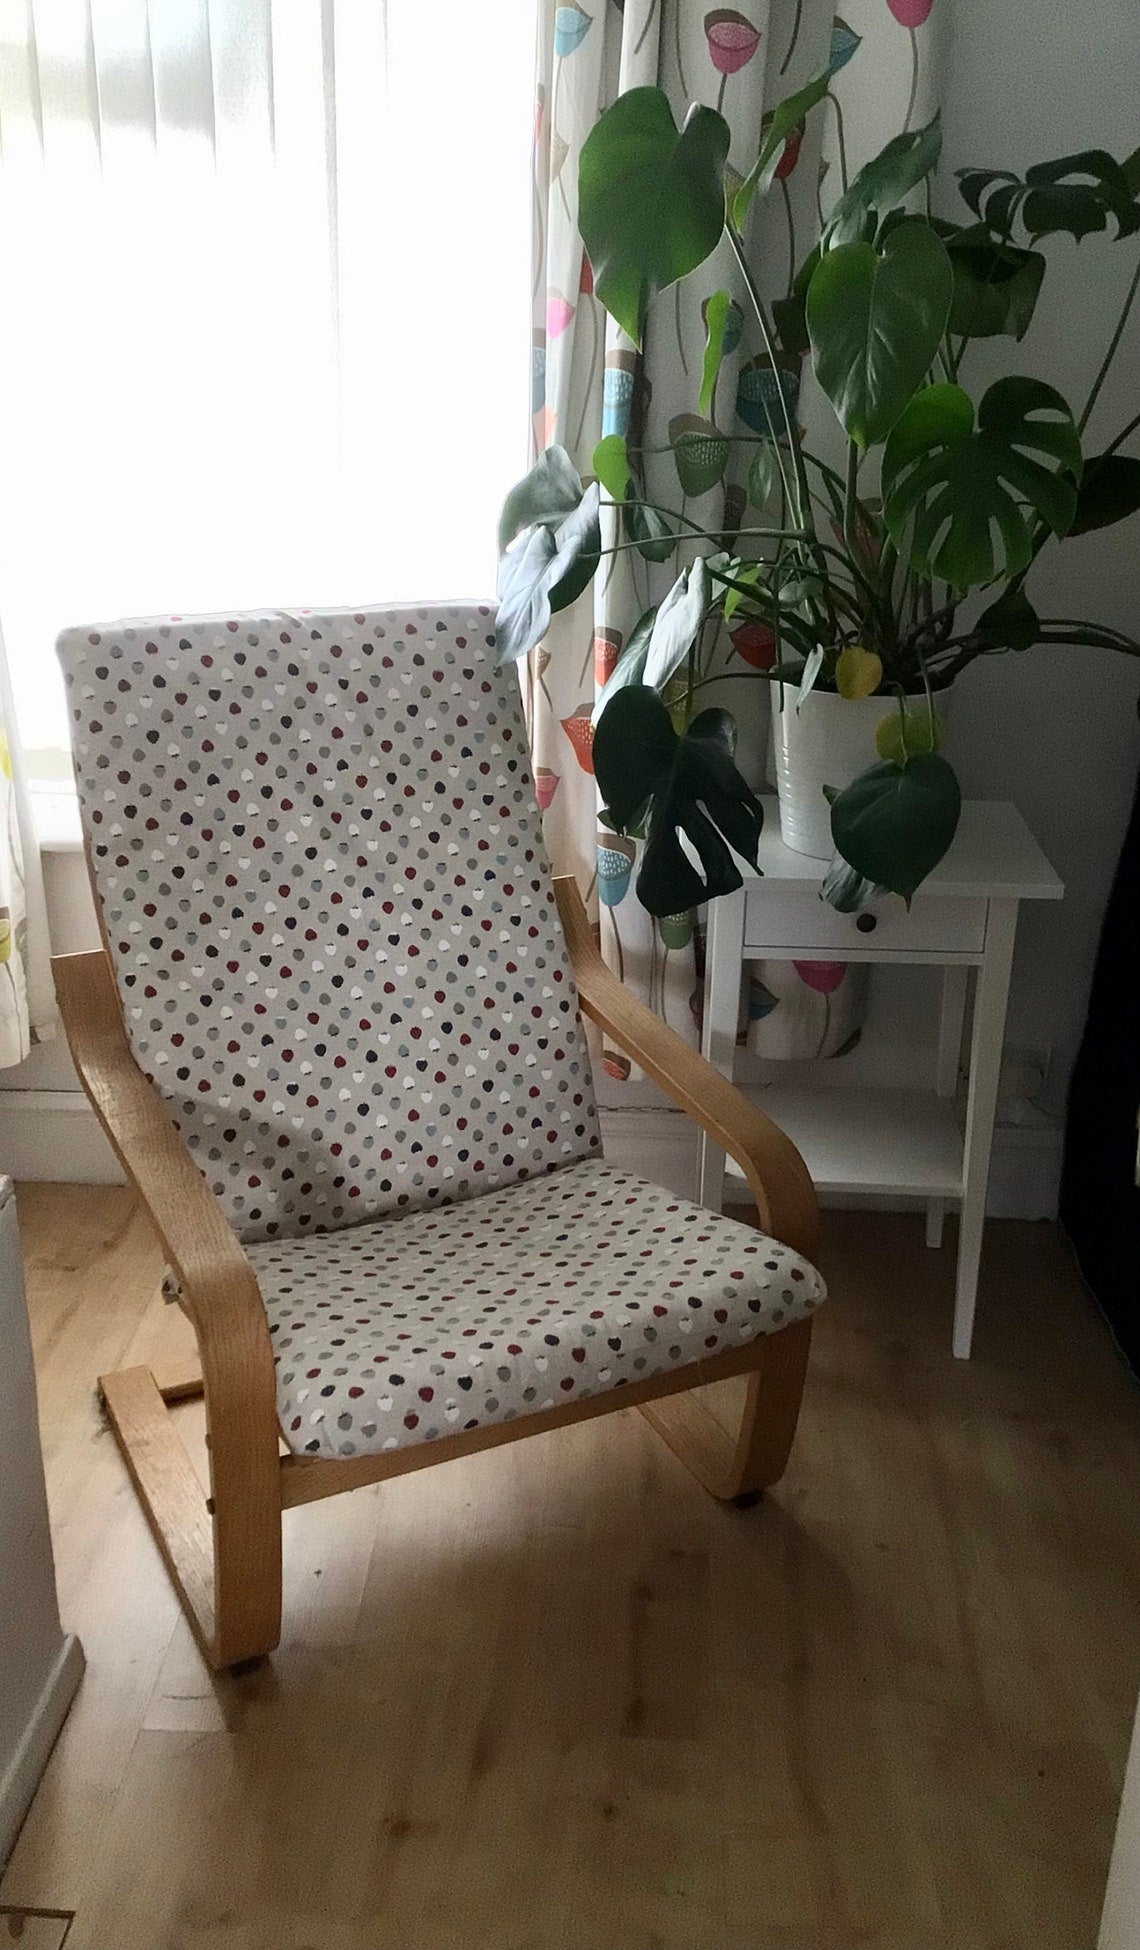 Ikea Poang replacement chair cover.  Custom made cover